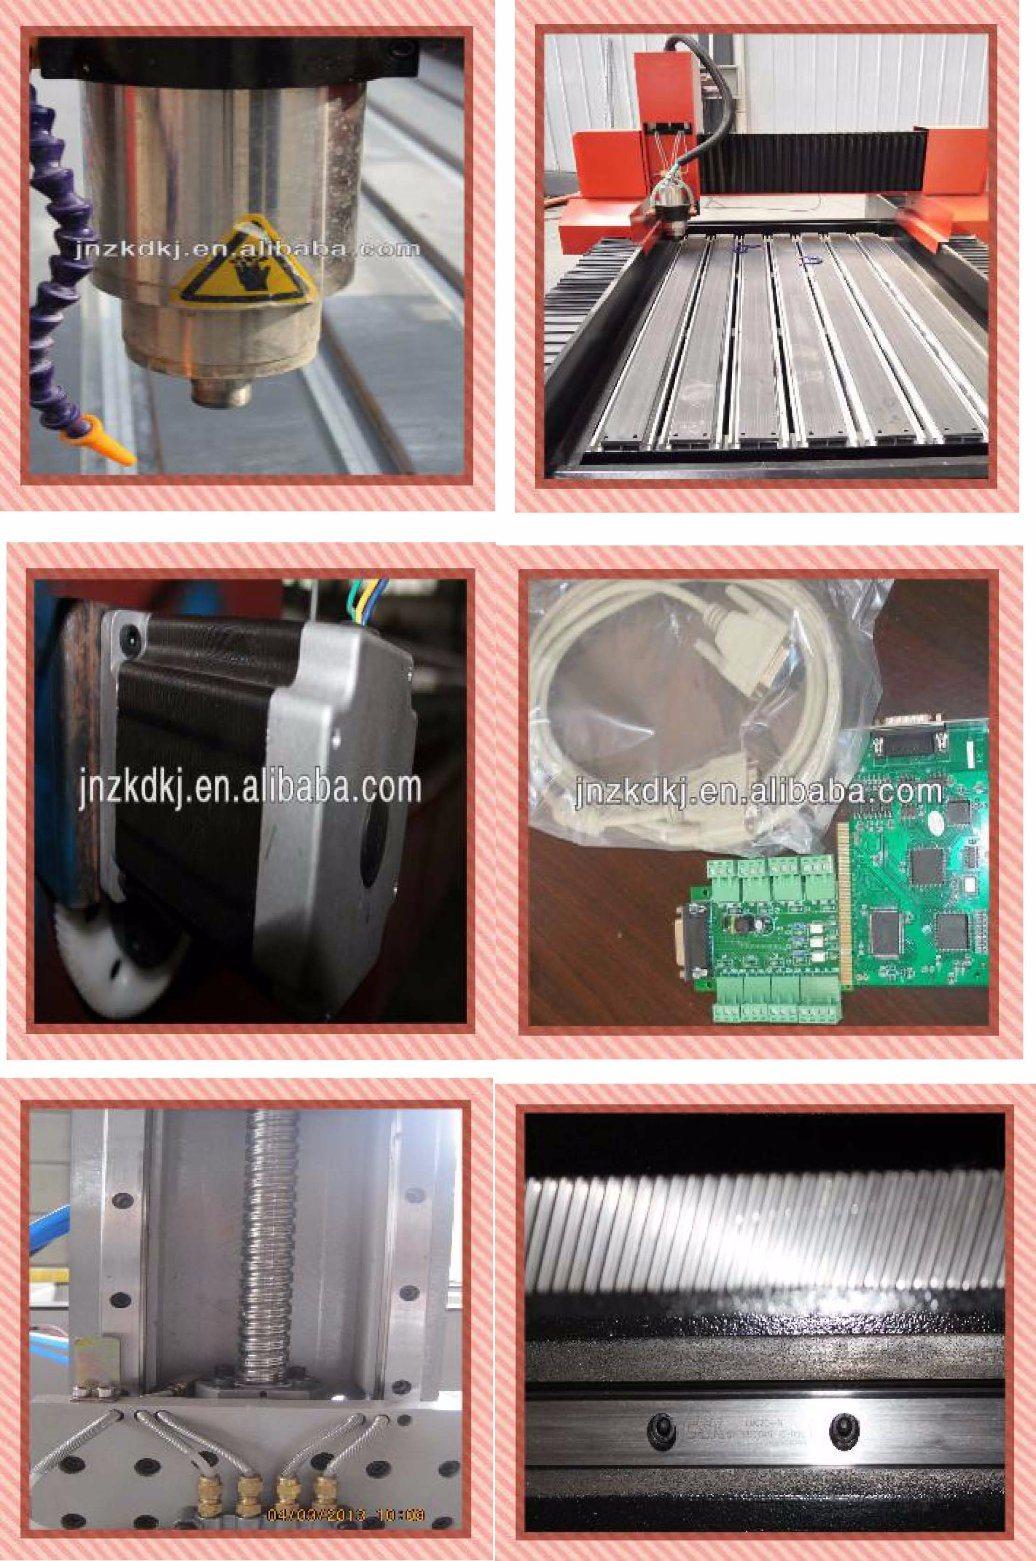 3D Marble CNC Router for Sale